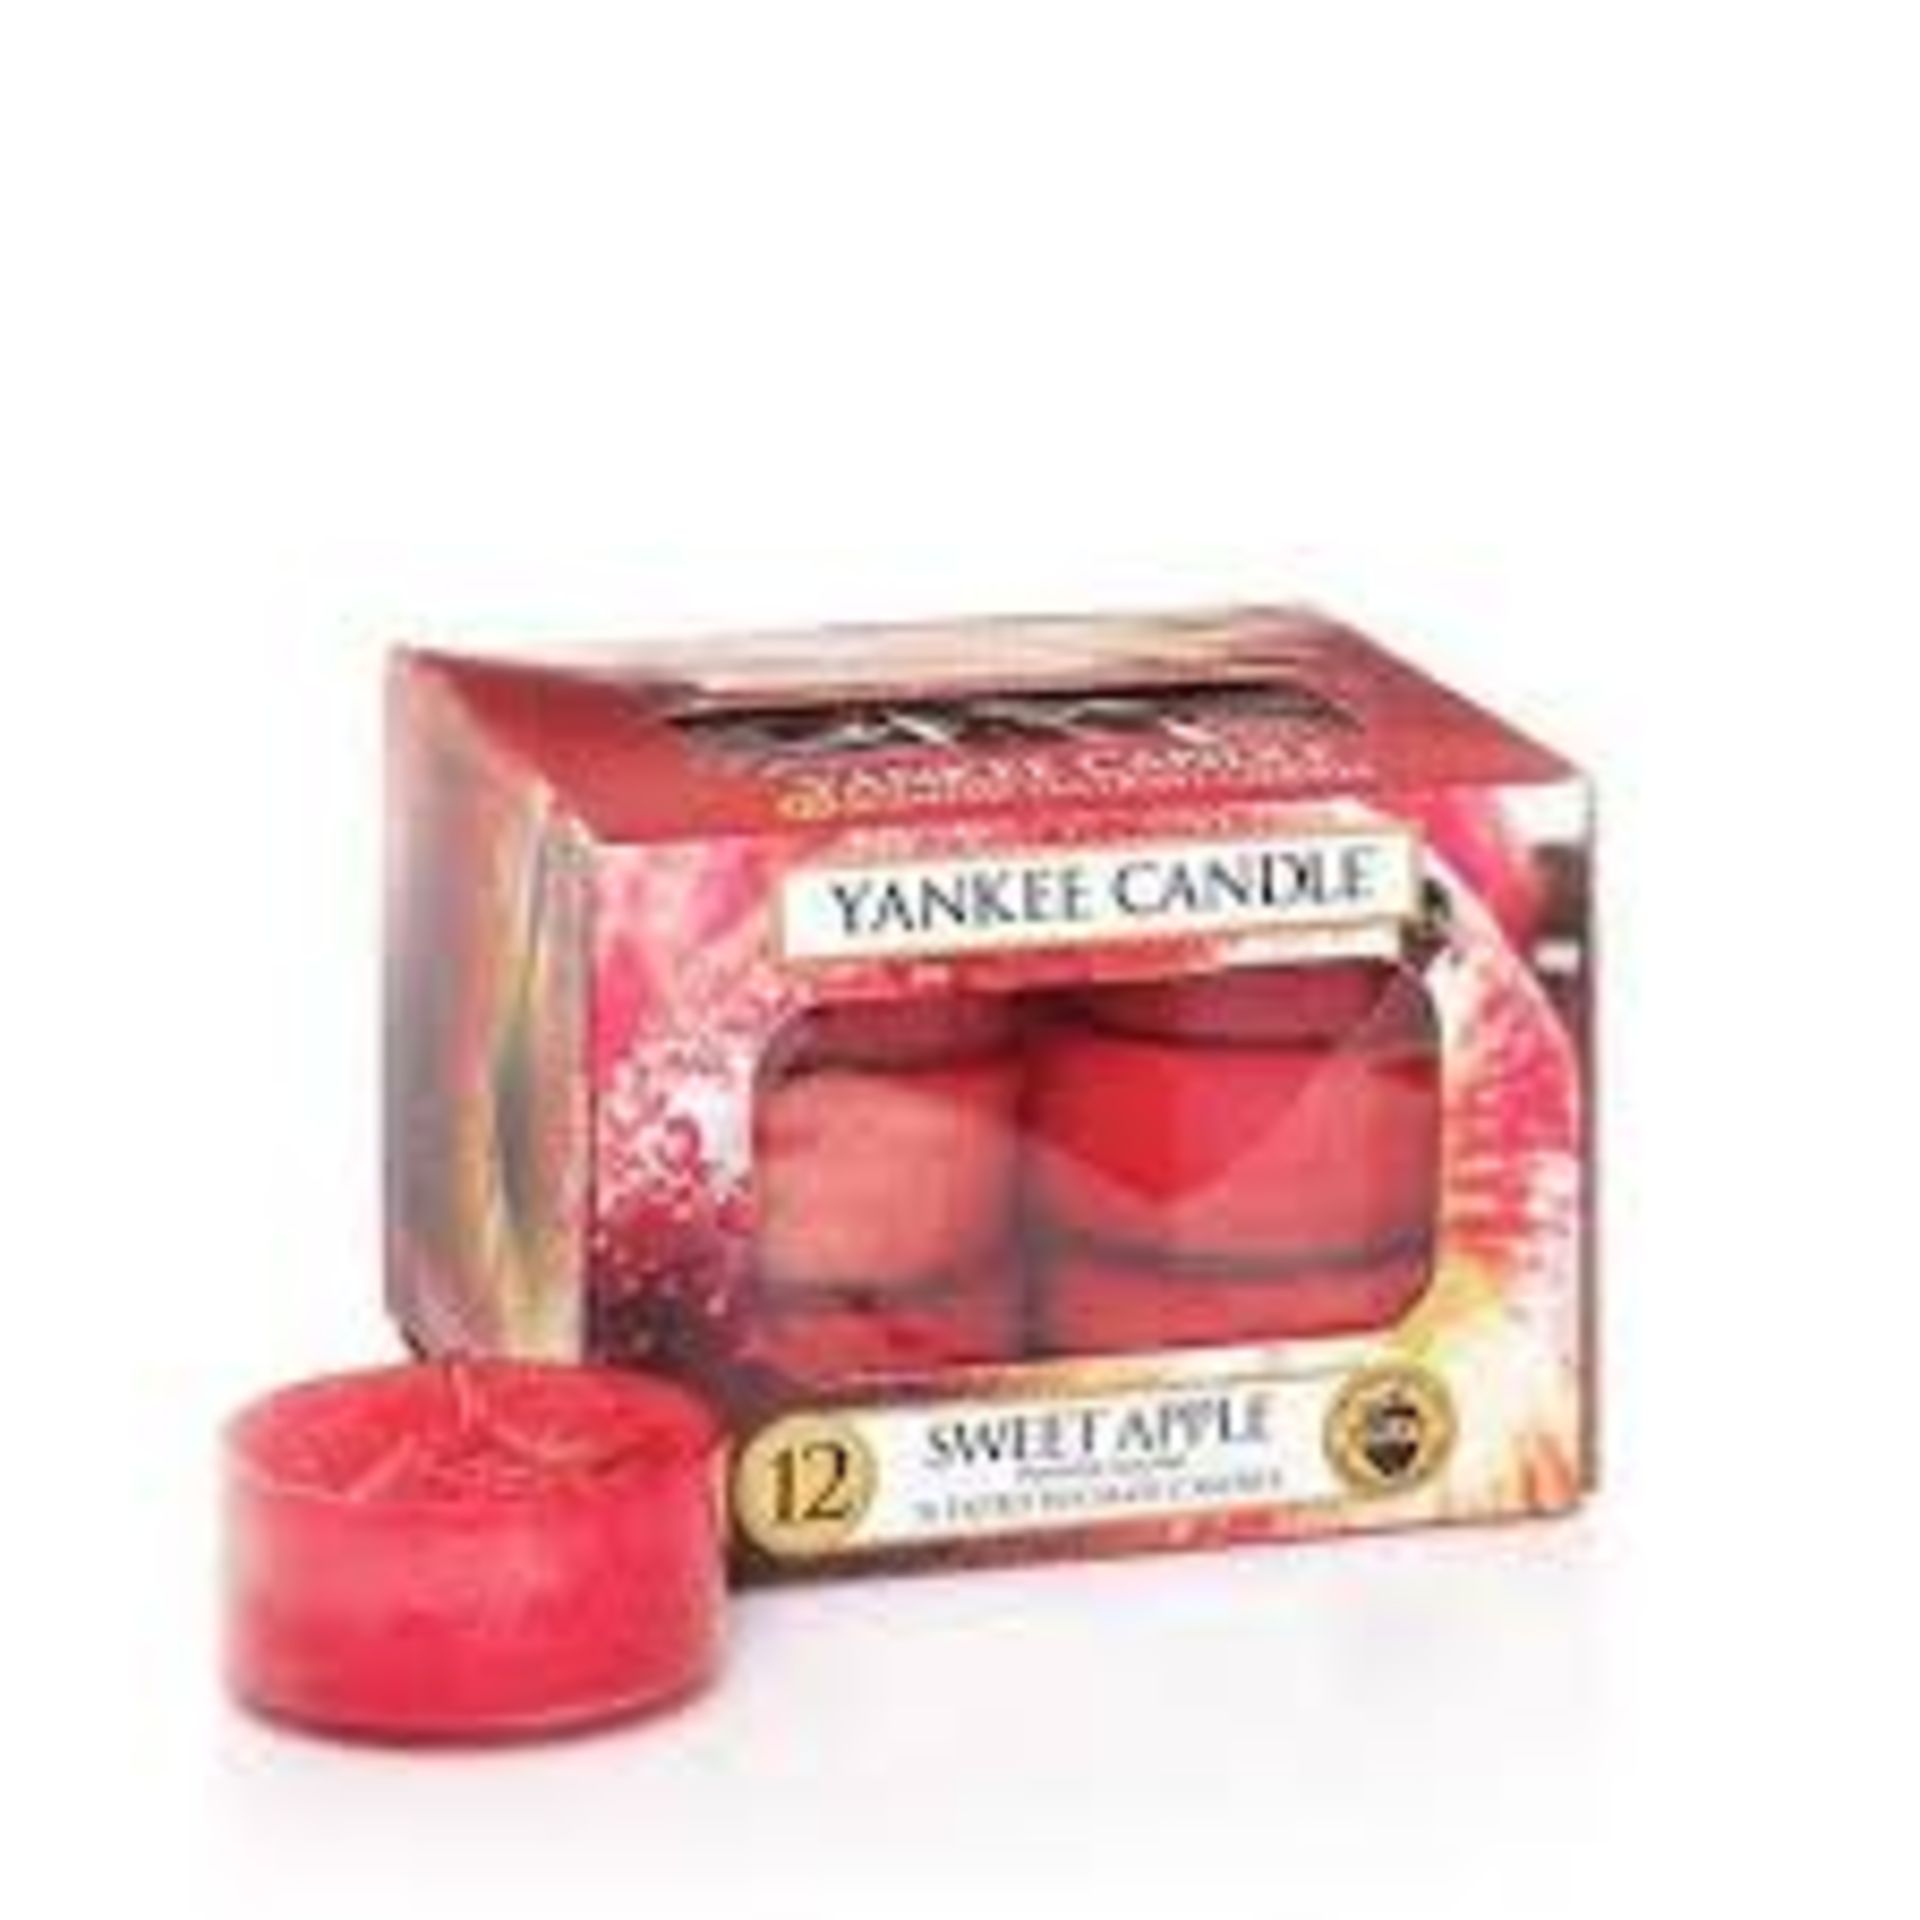 V *TRADE QTY* Brand New 12 Yankee Candle Scented Tea Light Candles Sweet Apple eBay Price £6.99 X